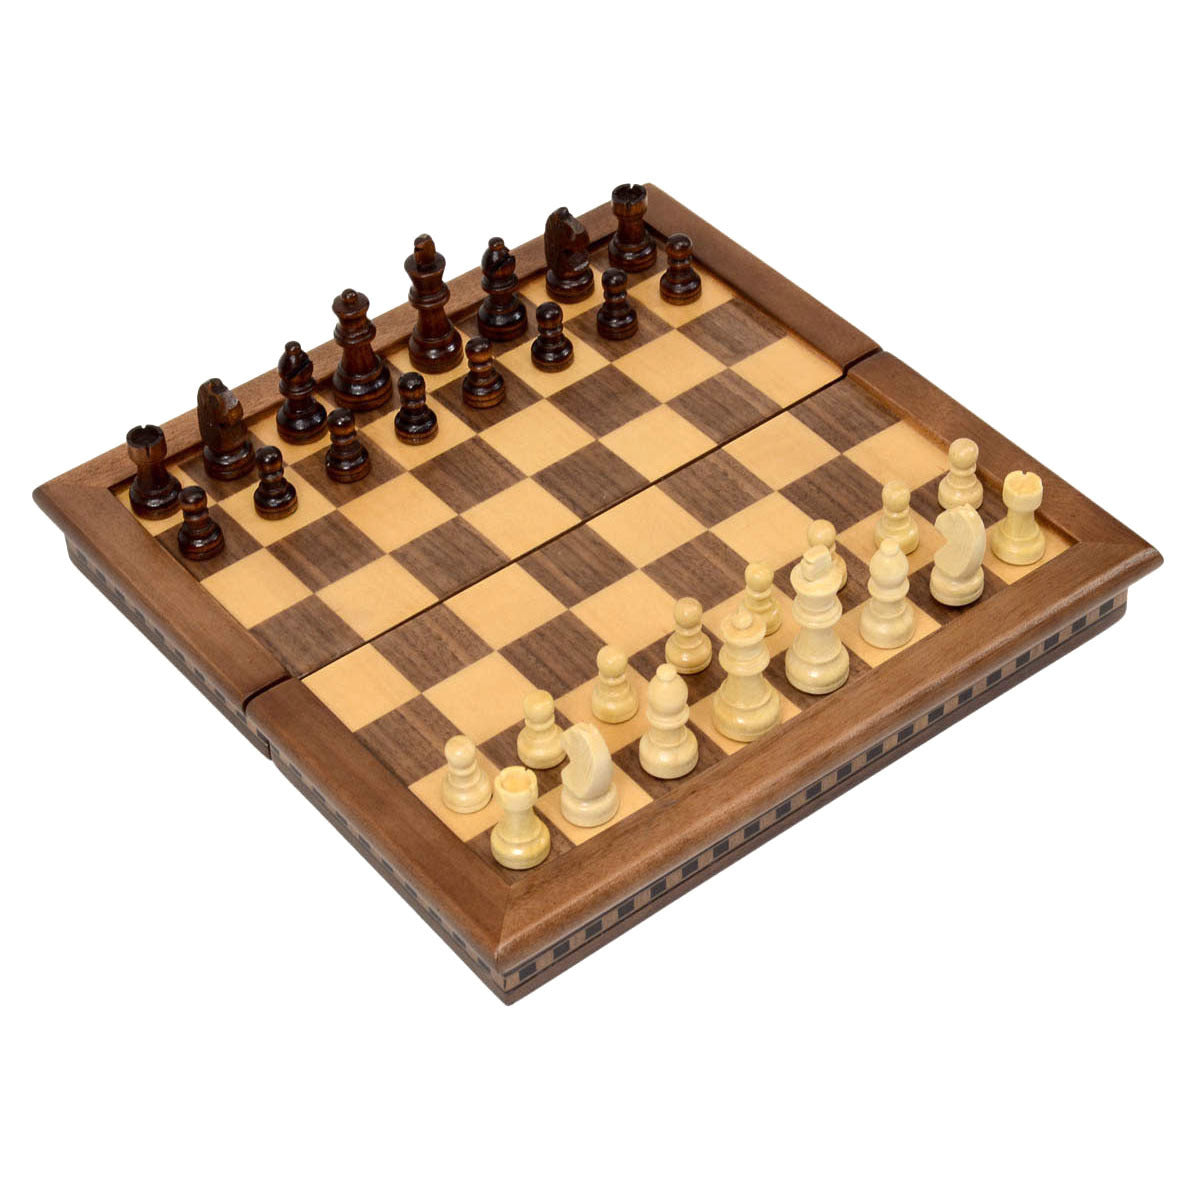 Folding Wooden Chess Set With Decorative Trim